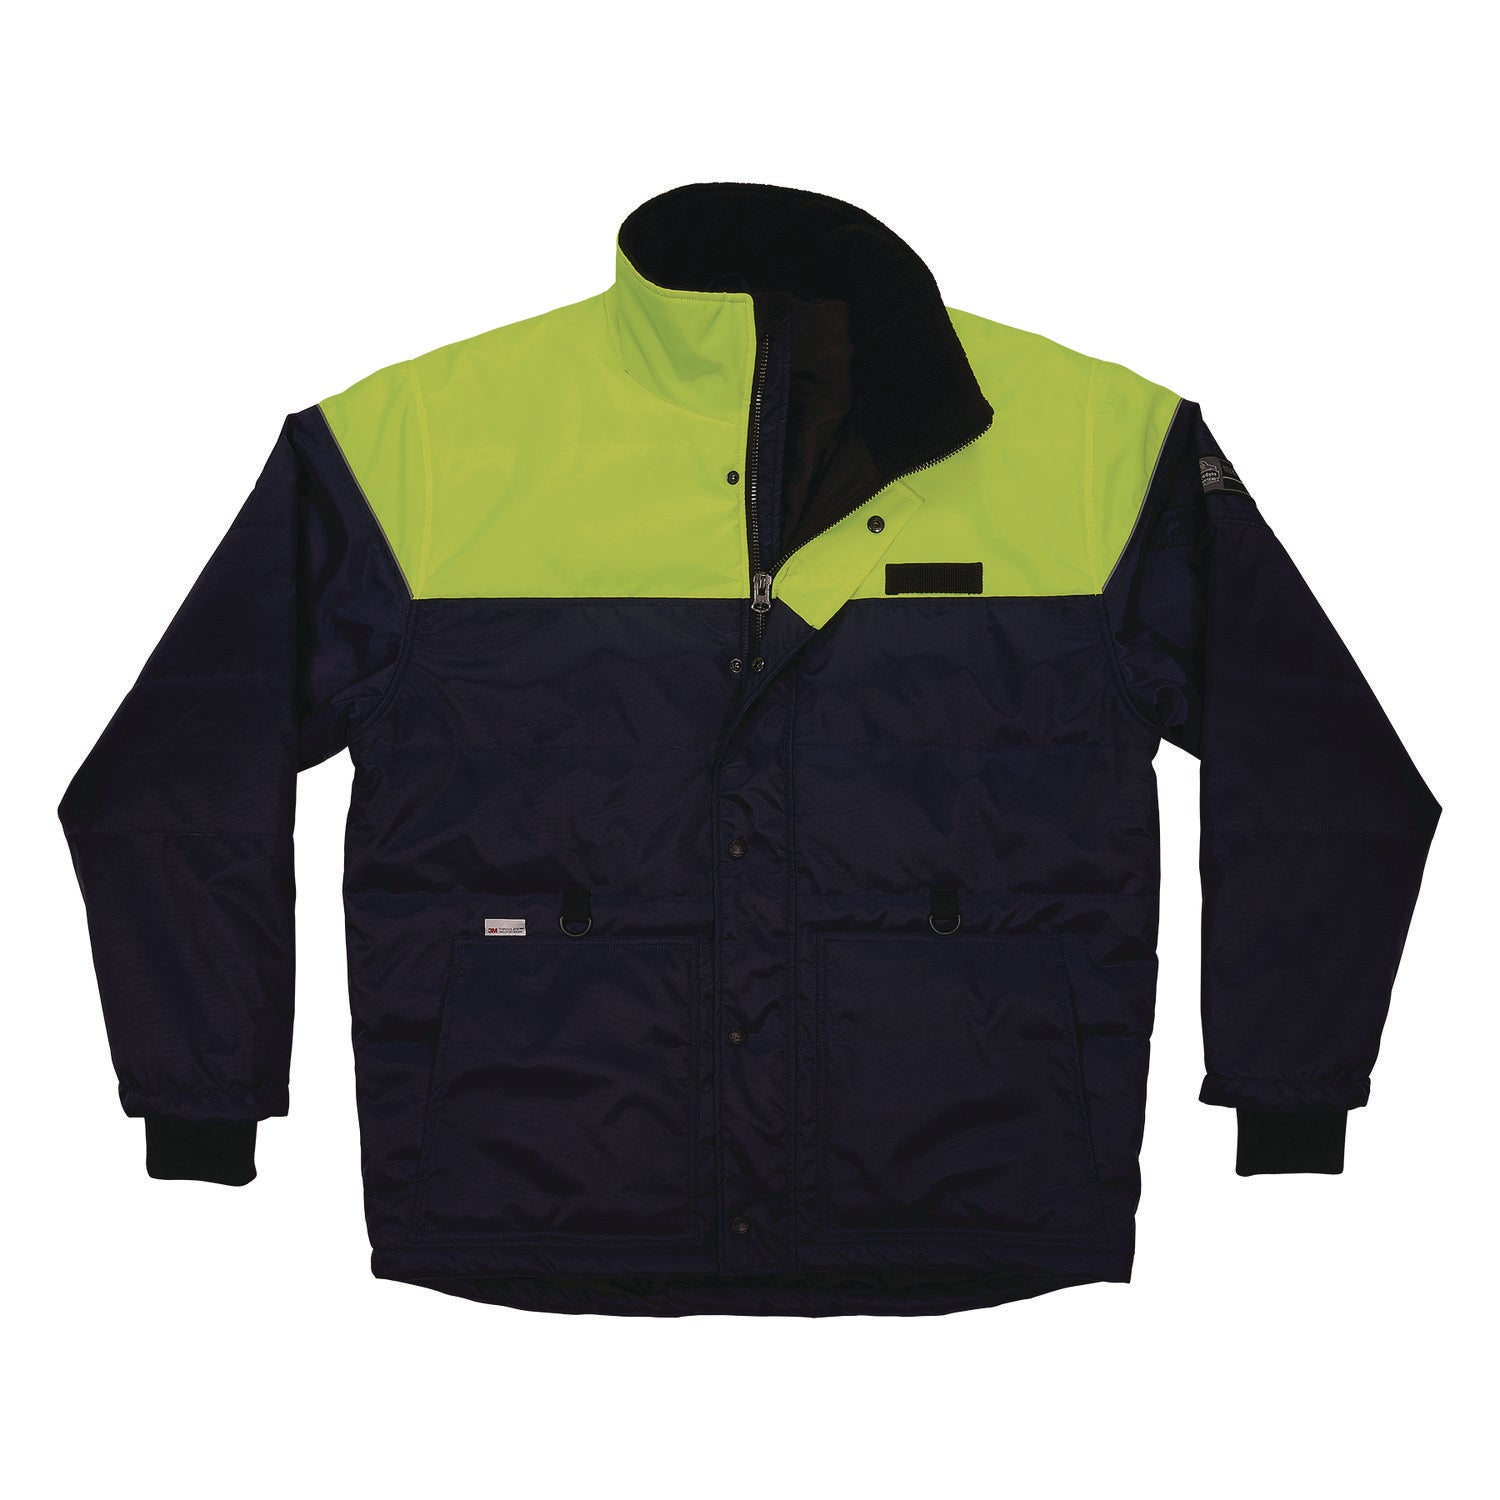 n-ferno-6476-insulated-freezer-jacket-large-navy-ships-in-1-3-business-days_ego41254 - 1